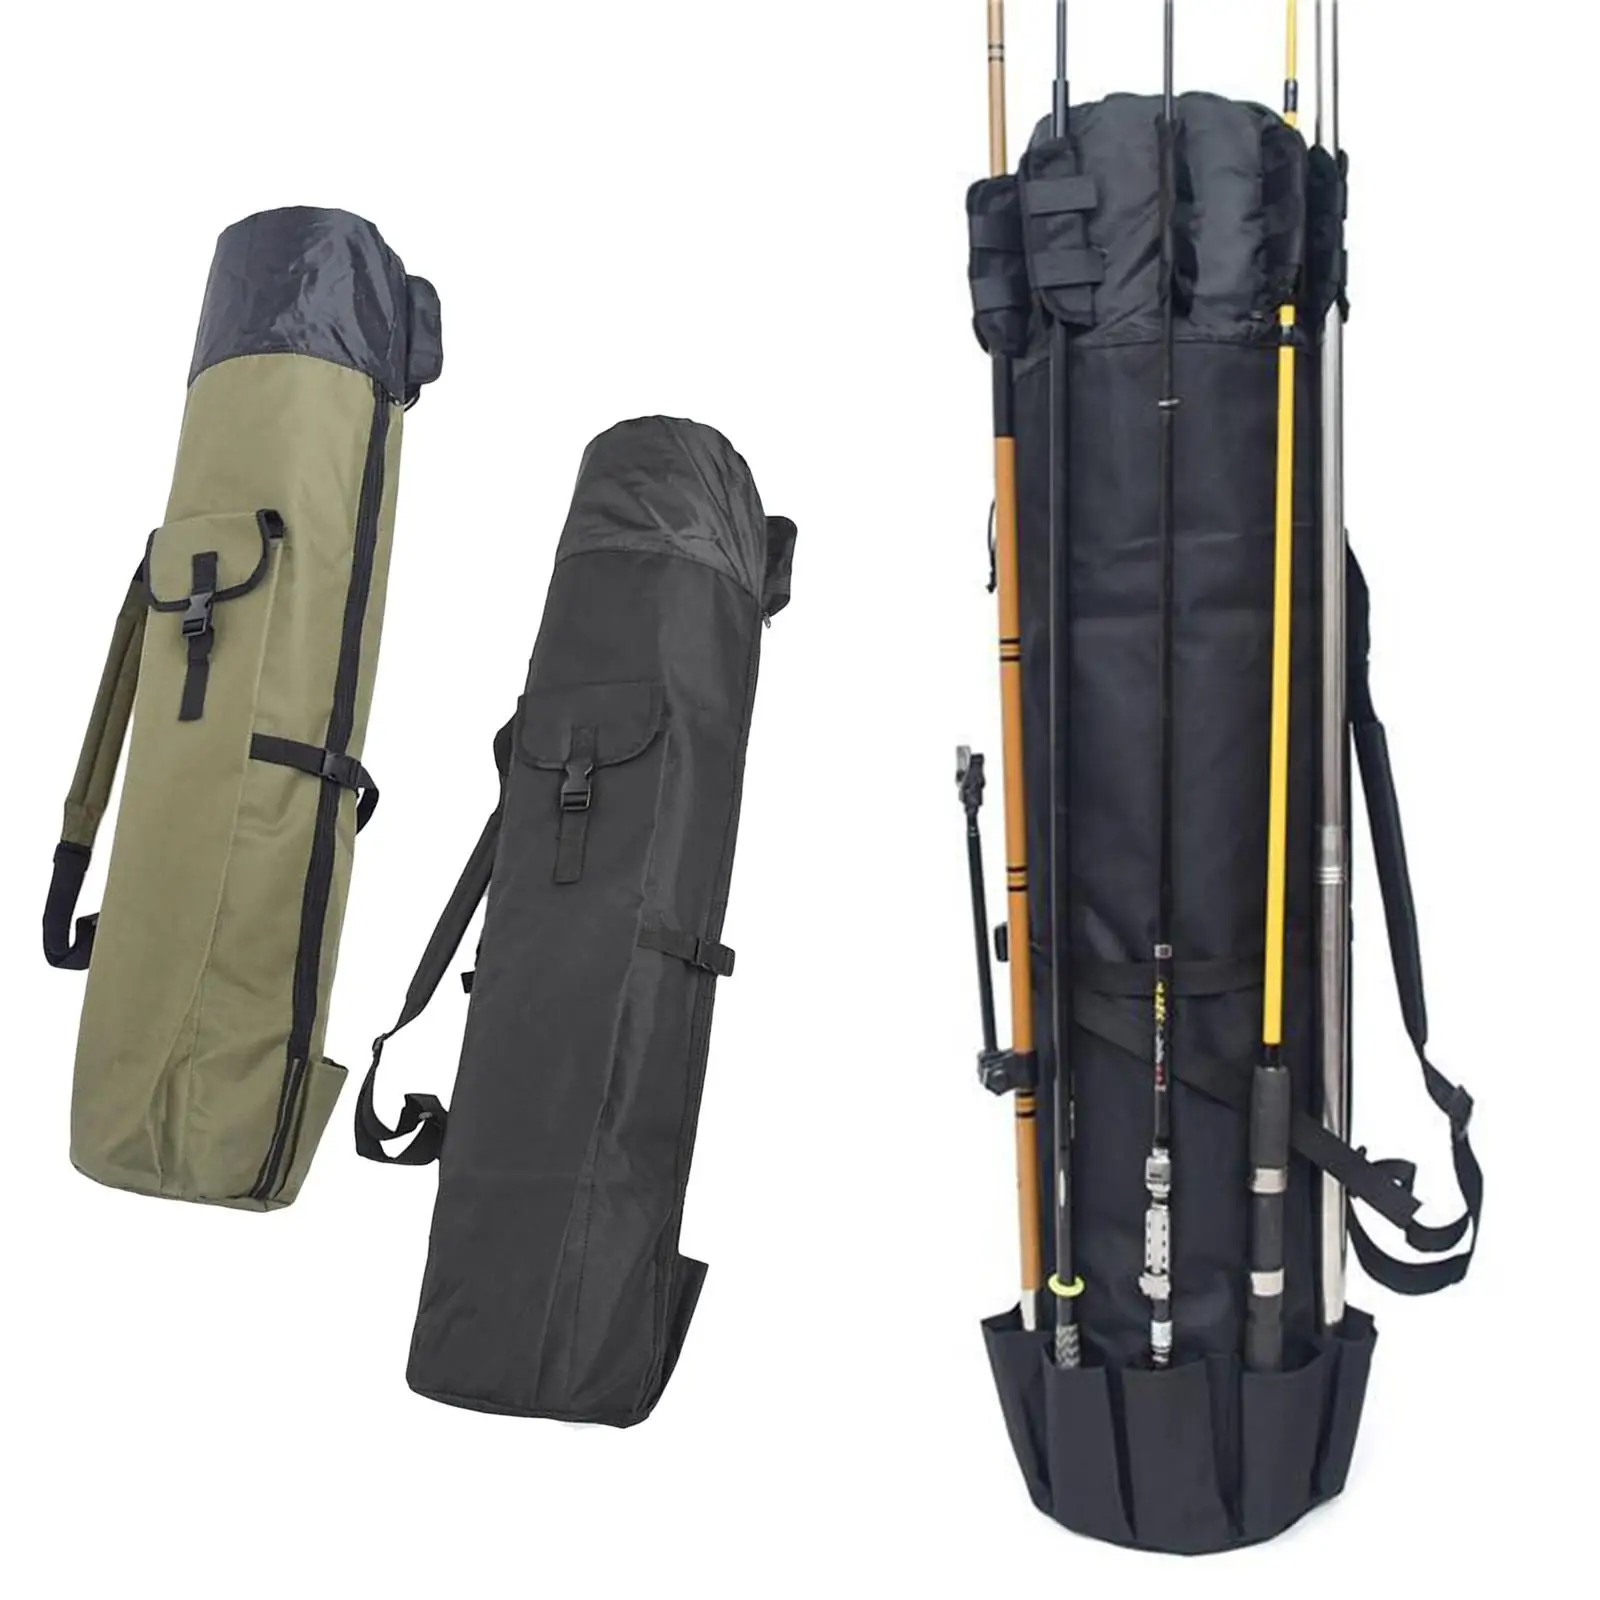 Waterproof Fishing Tackle Bag Fishing Rods Holder Travel  Case Pole Tools Storage  Holds 5 Poles